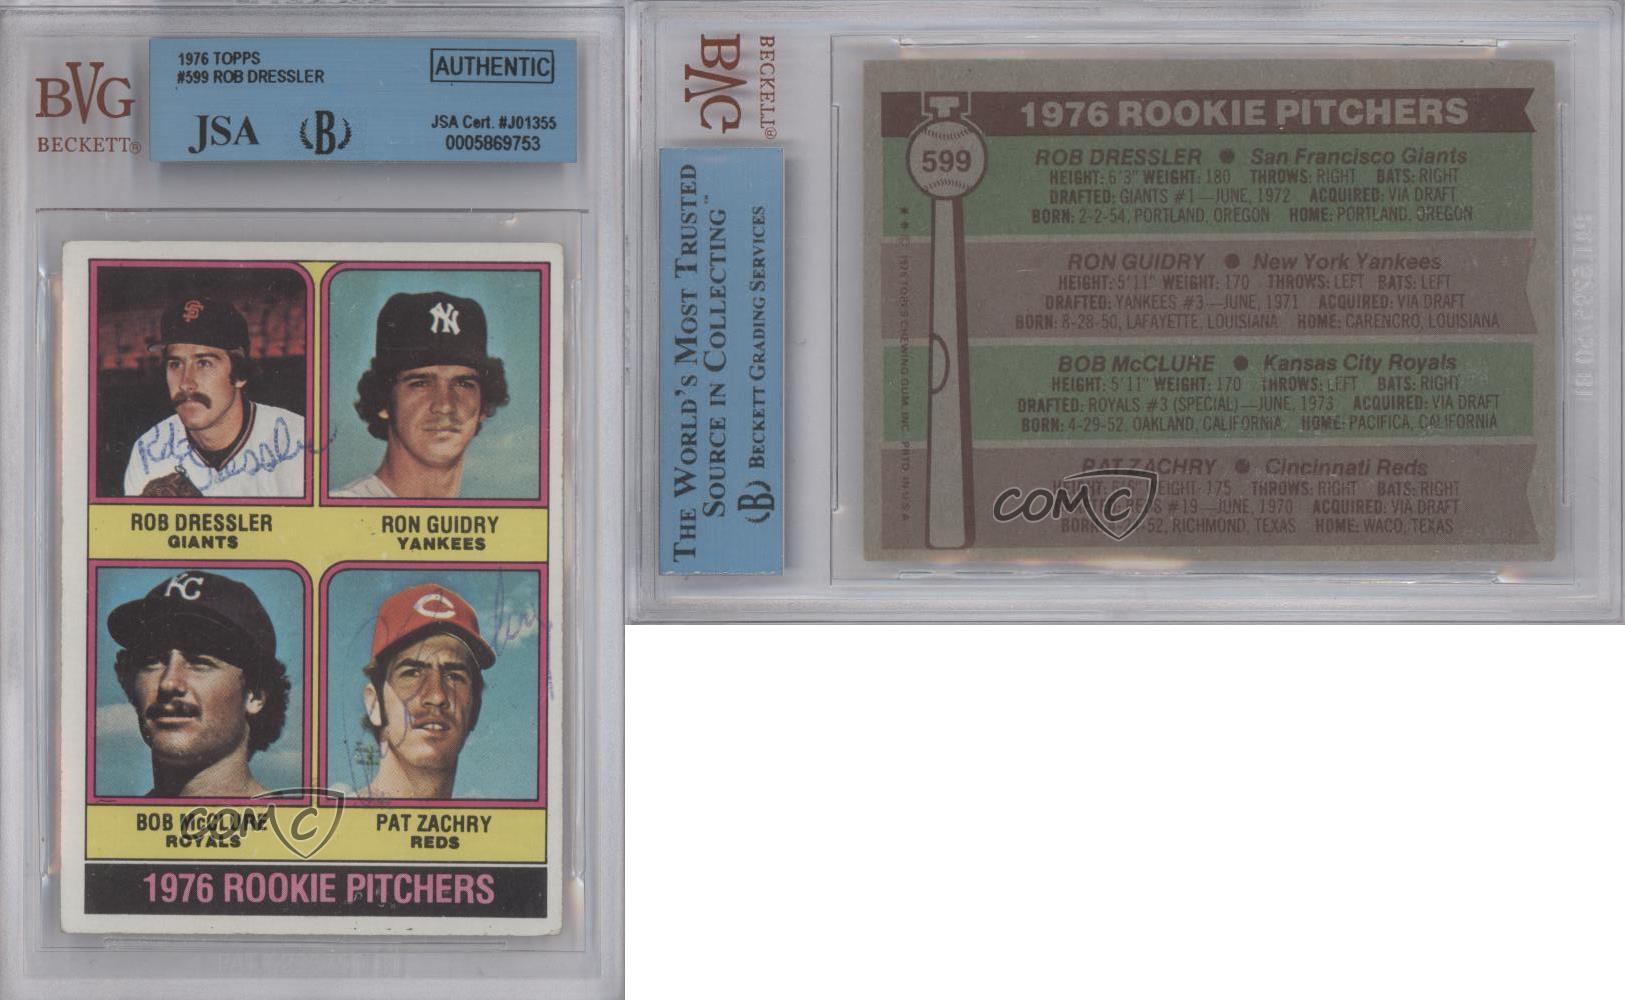 1976 Topps #599 Rookie Pitchers Ron Guidry / Rob Dressler / Bob McClure /  Pat Zachry